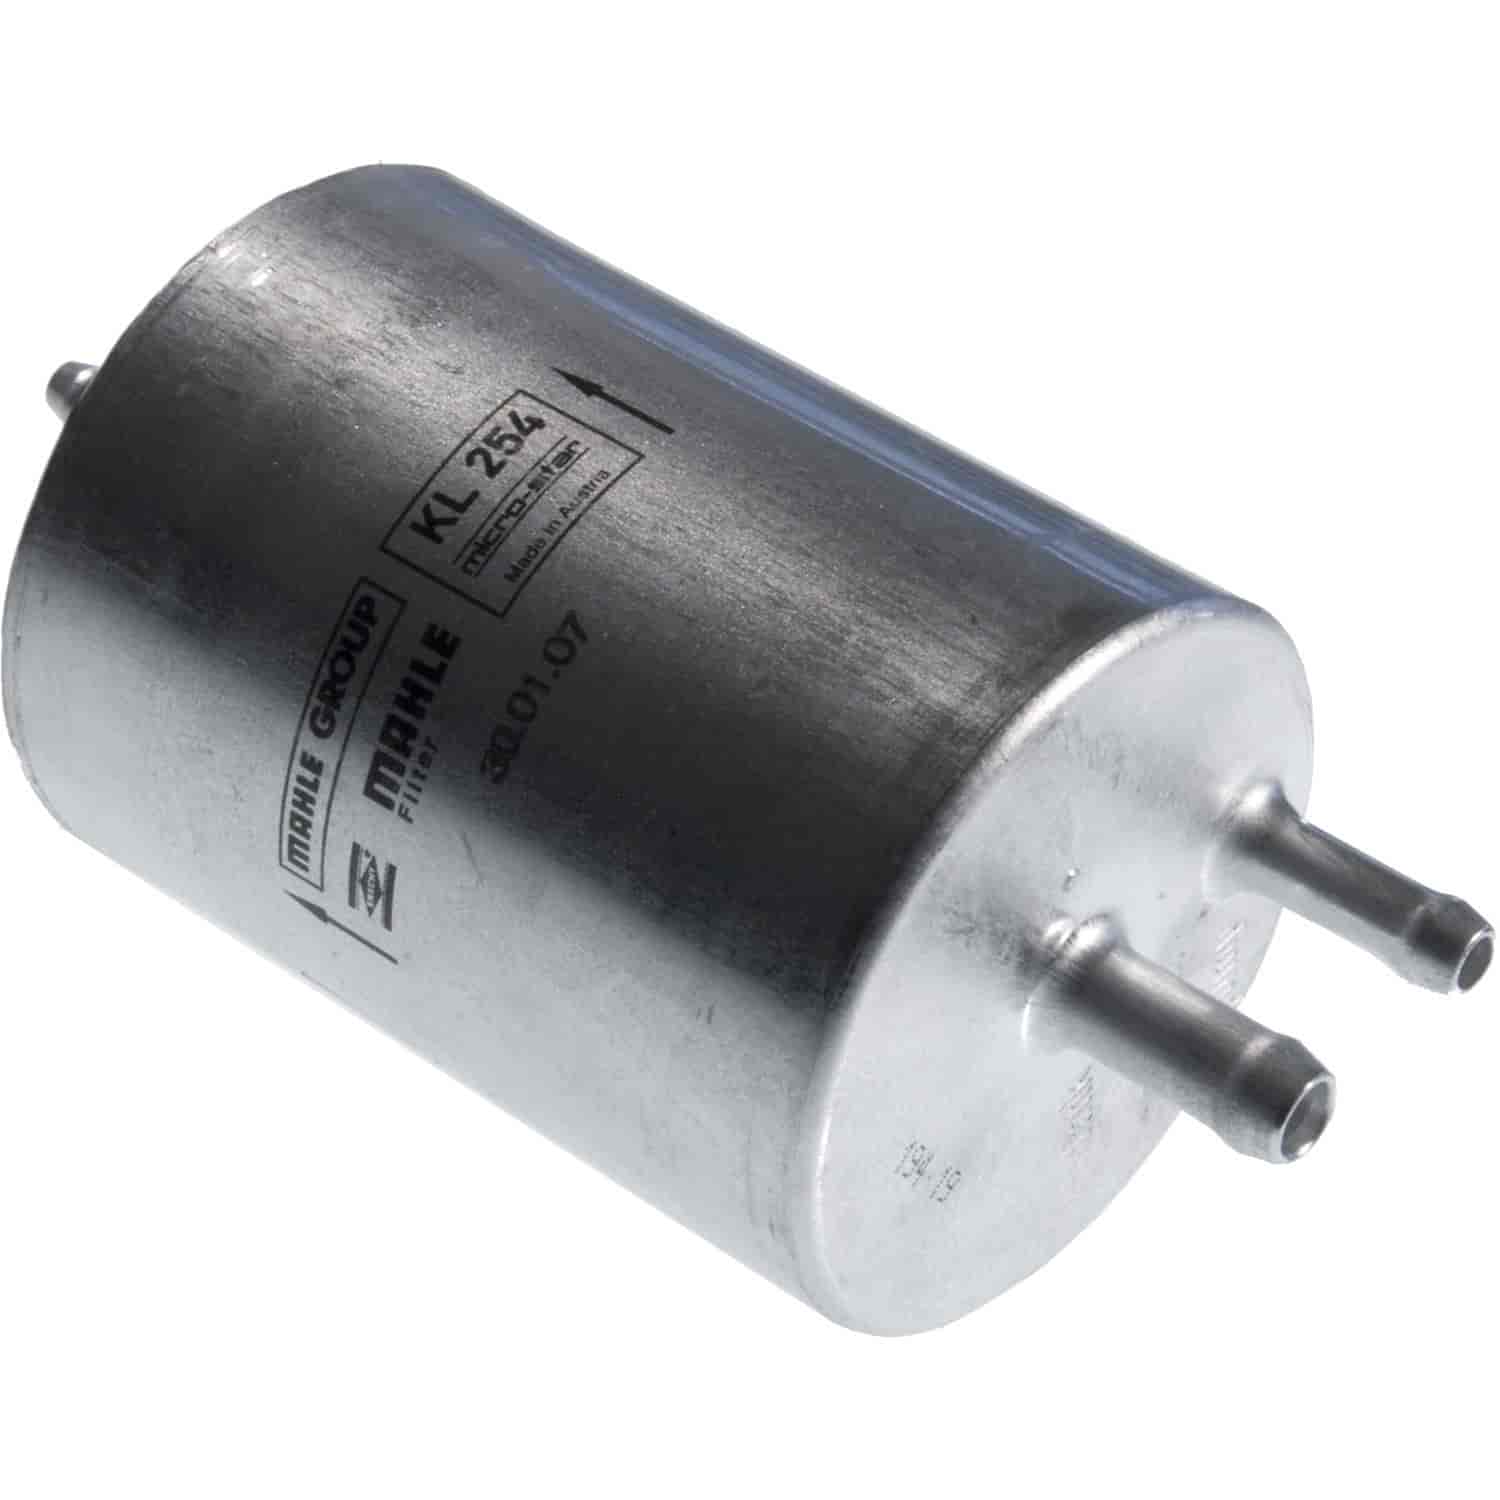 Mahle Fuel Filter MB CL S Class and Maybach 5.5L 2002->